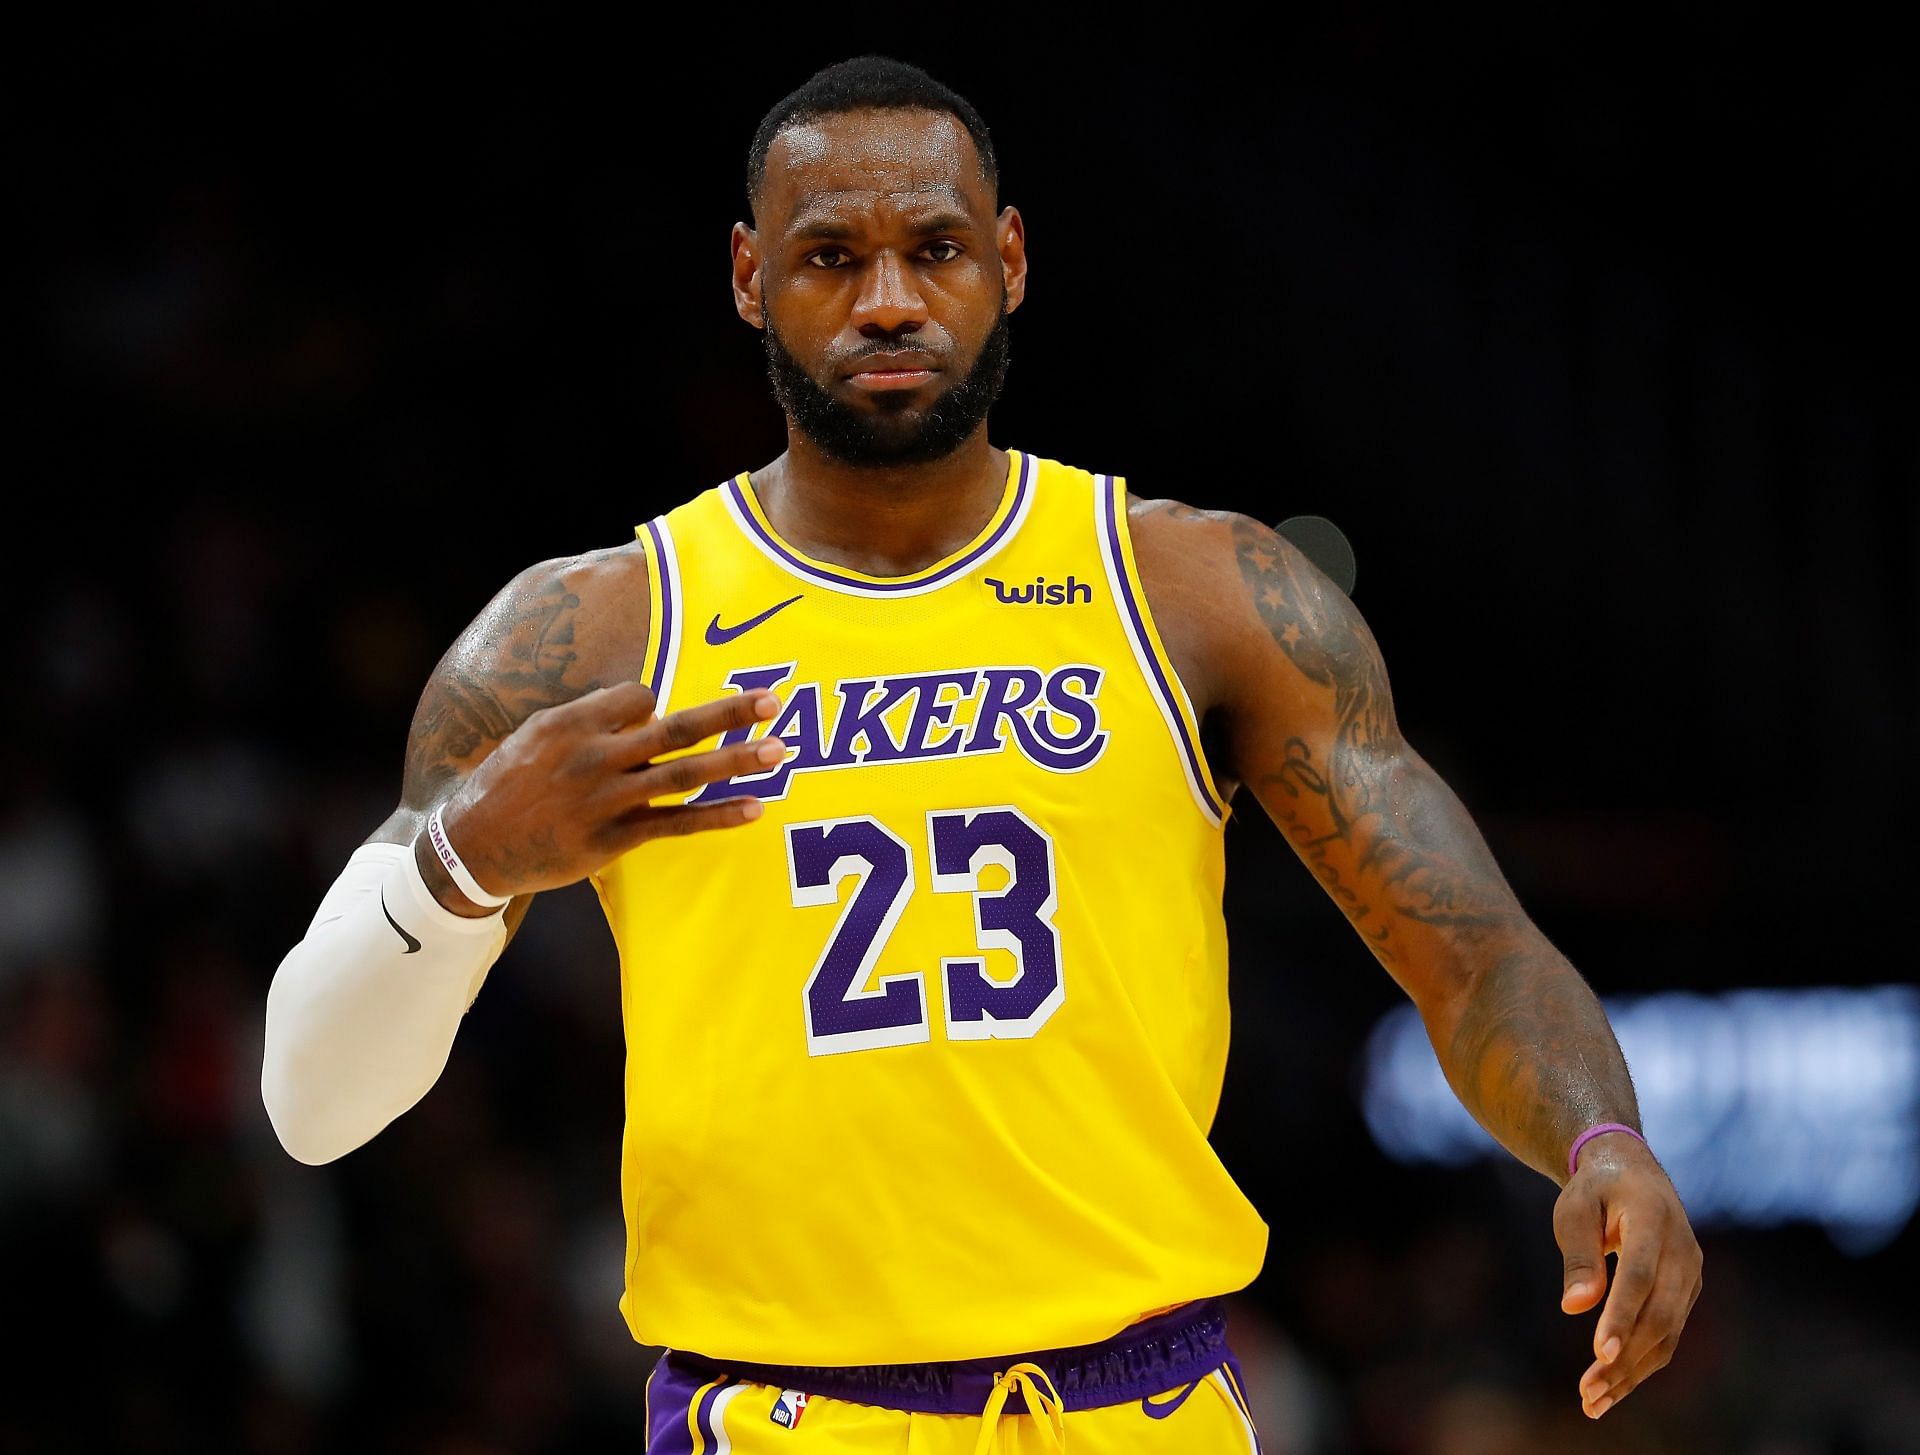 LeBron James of the LA Lakers in 2019